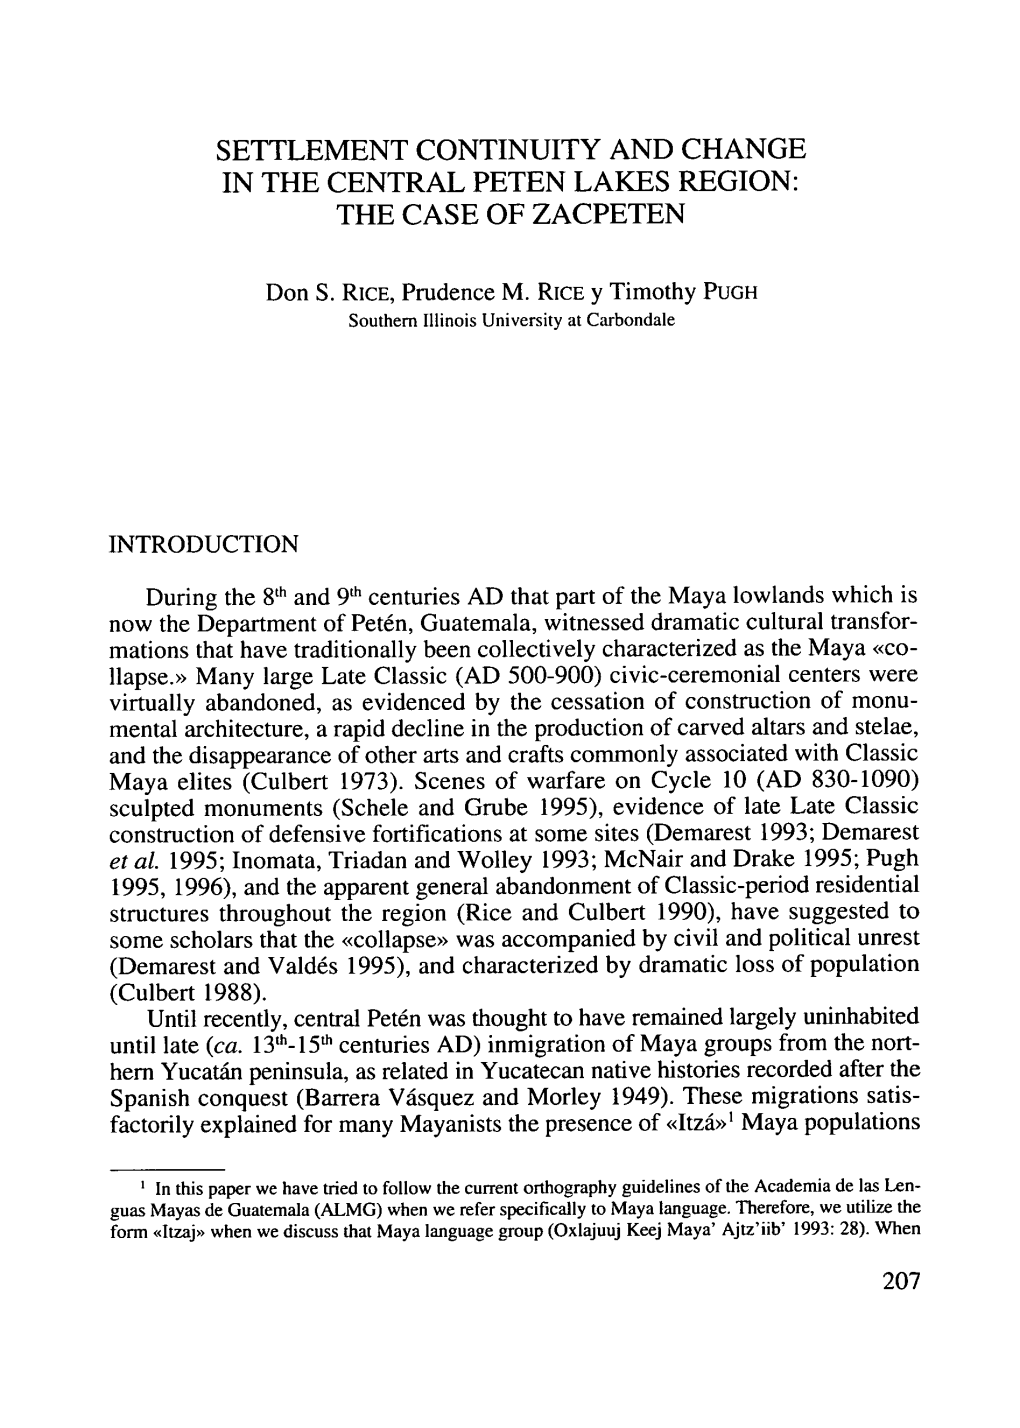 Settlement Continuity and Change in the Central Peten Lakes Region: the Case of Zacpeten